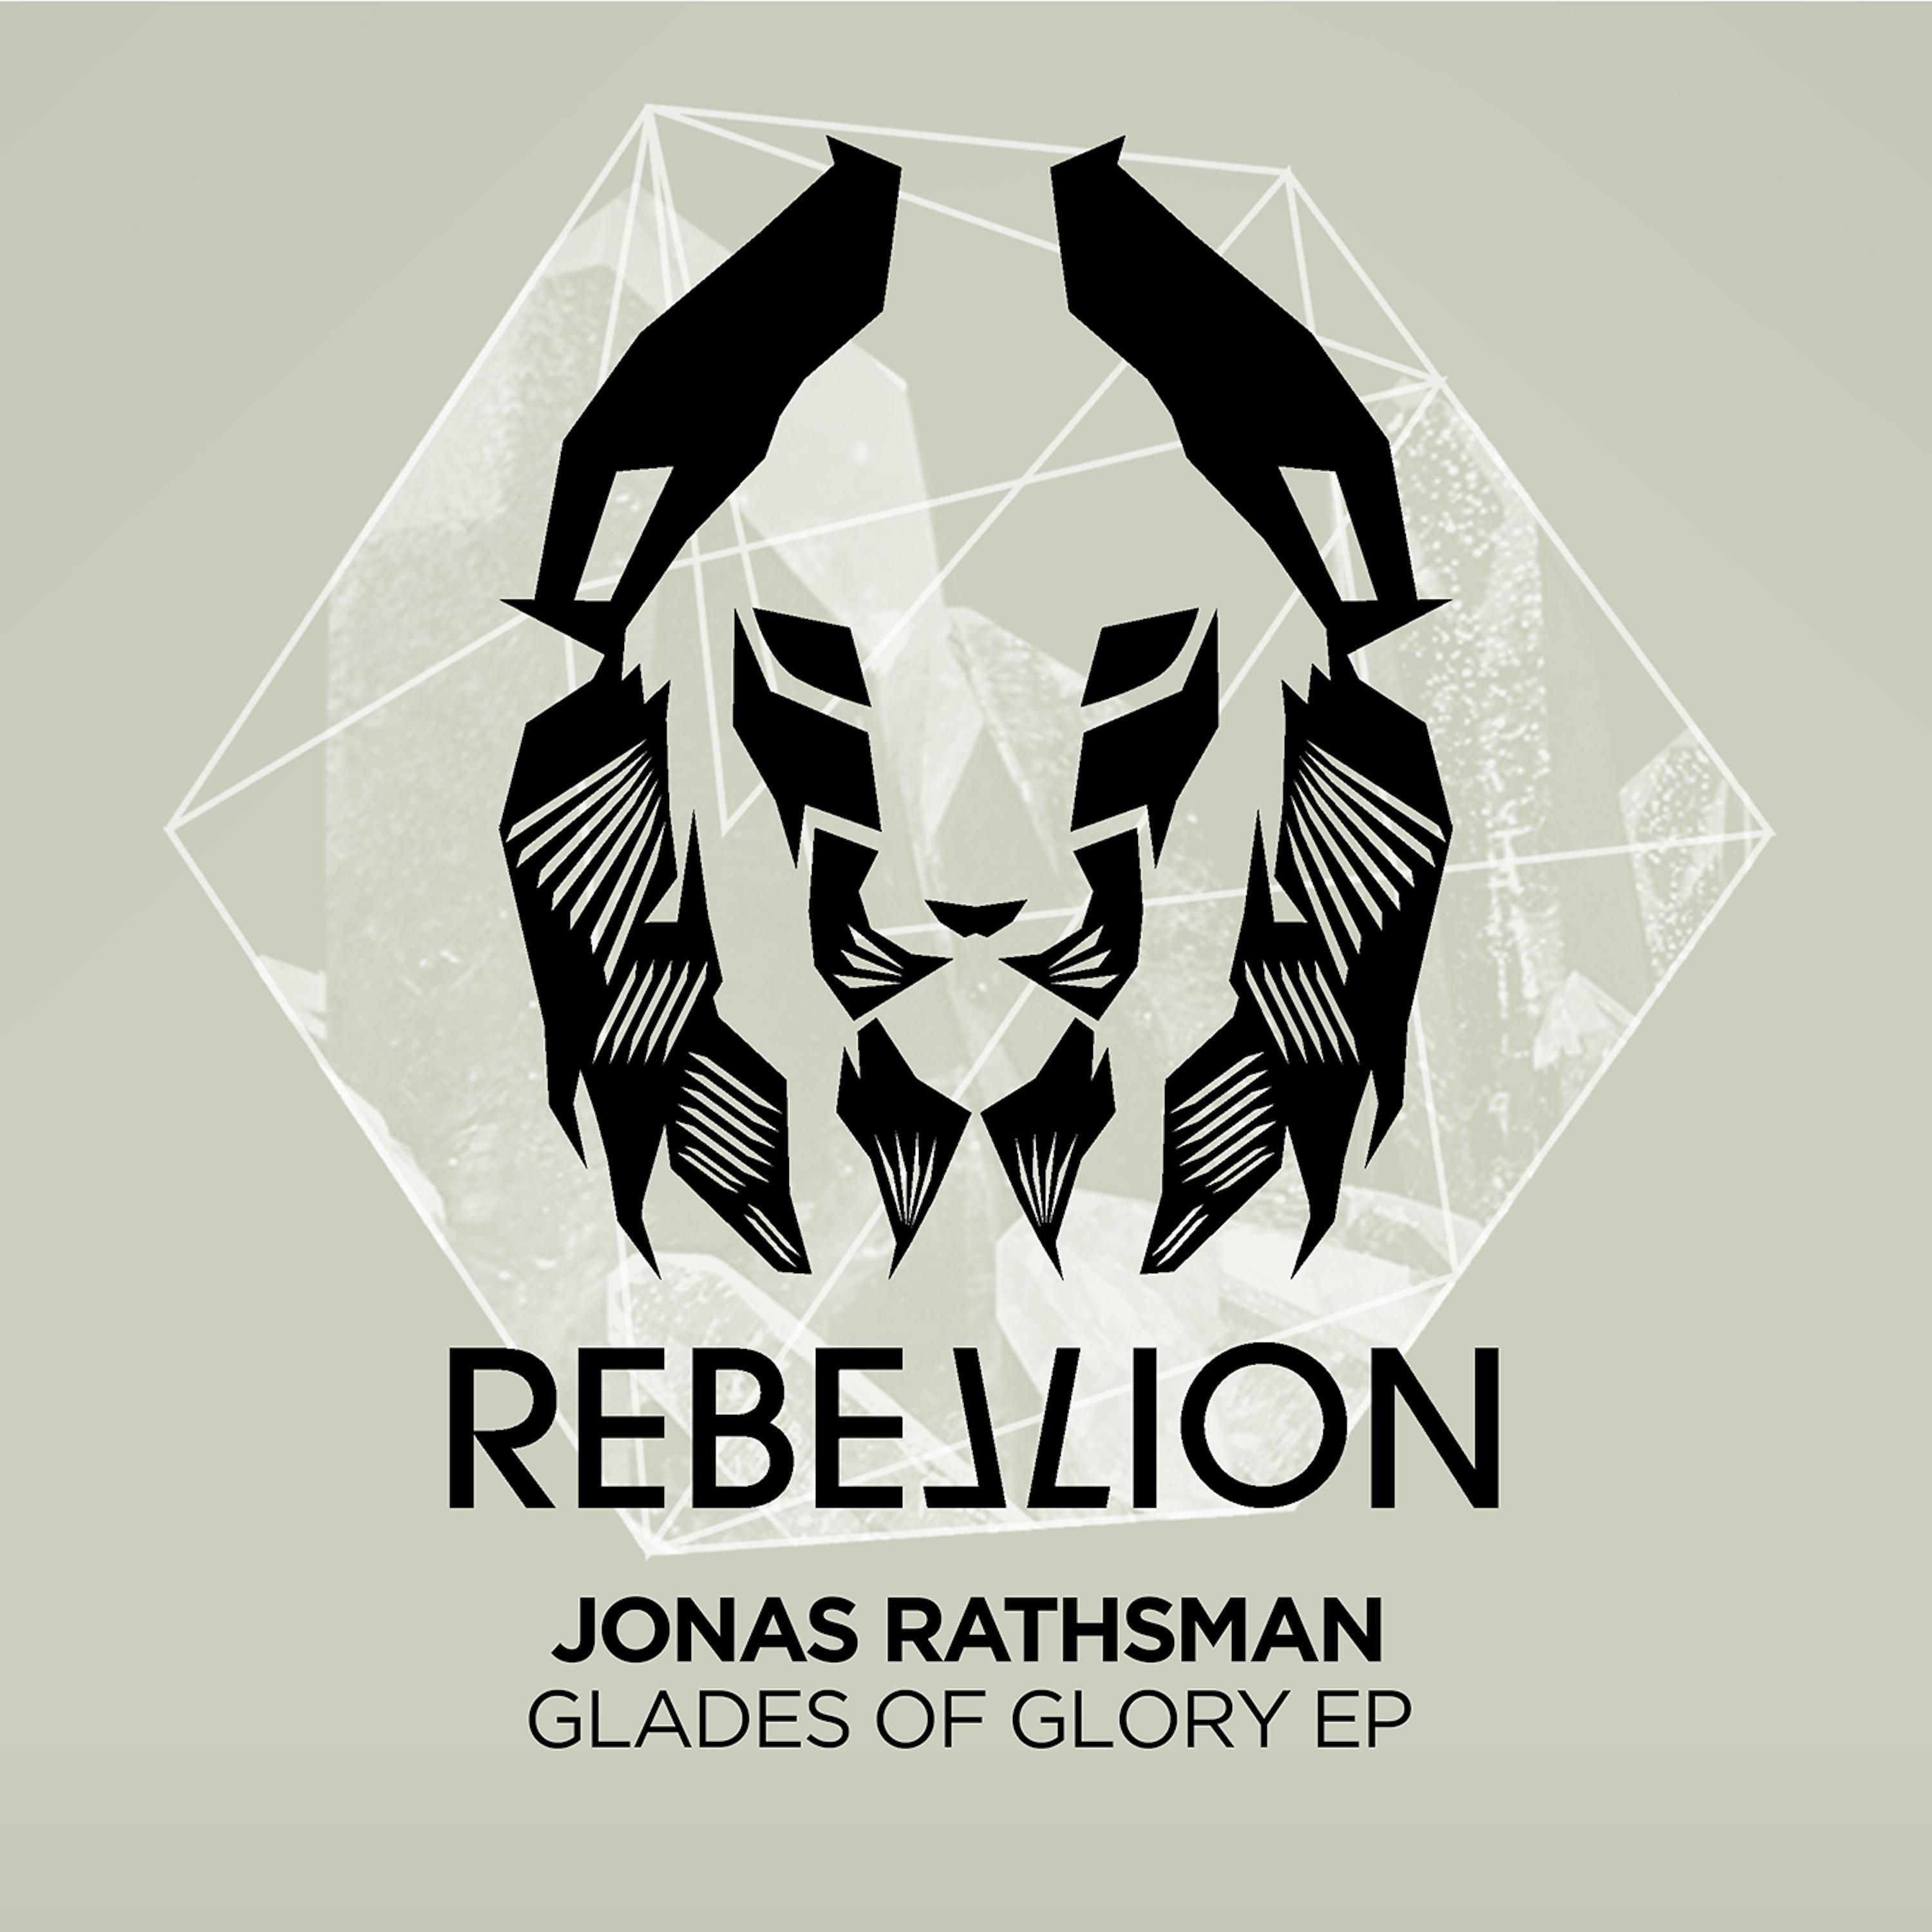 Glades Of Glory EP